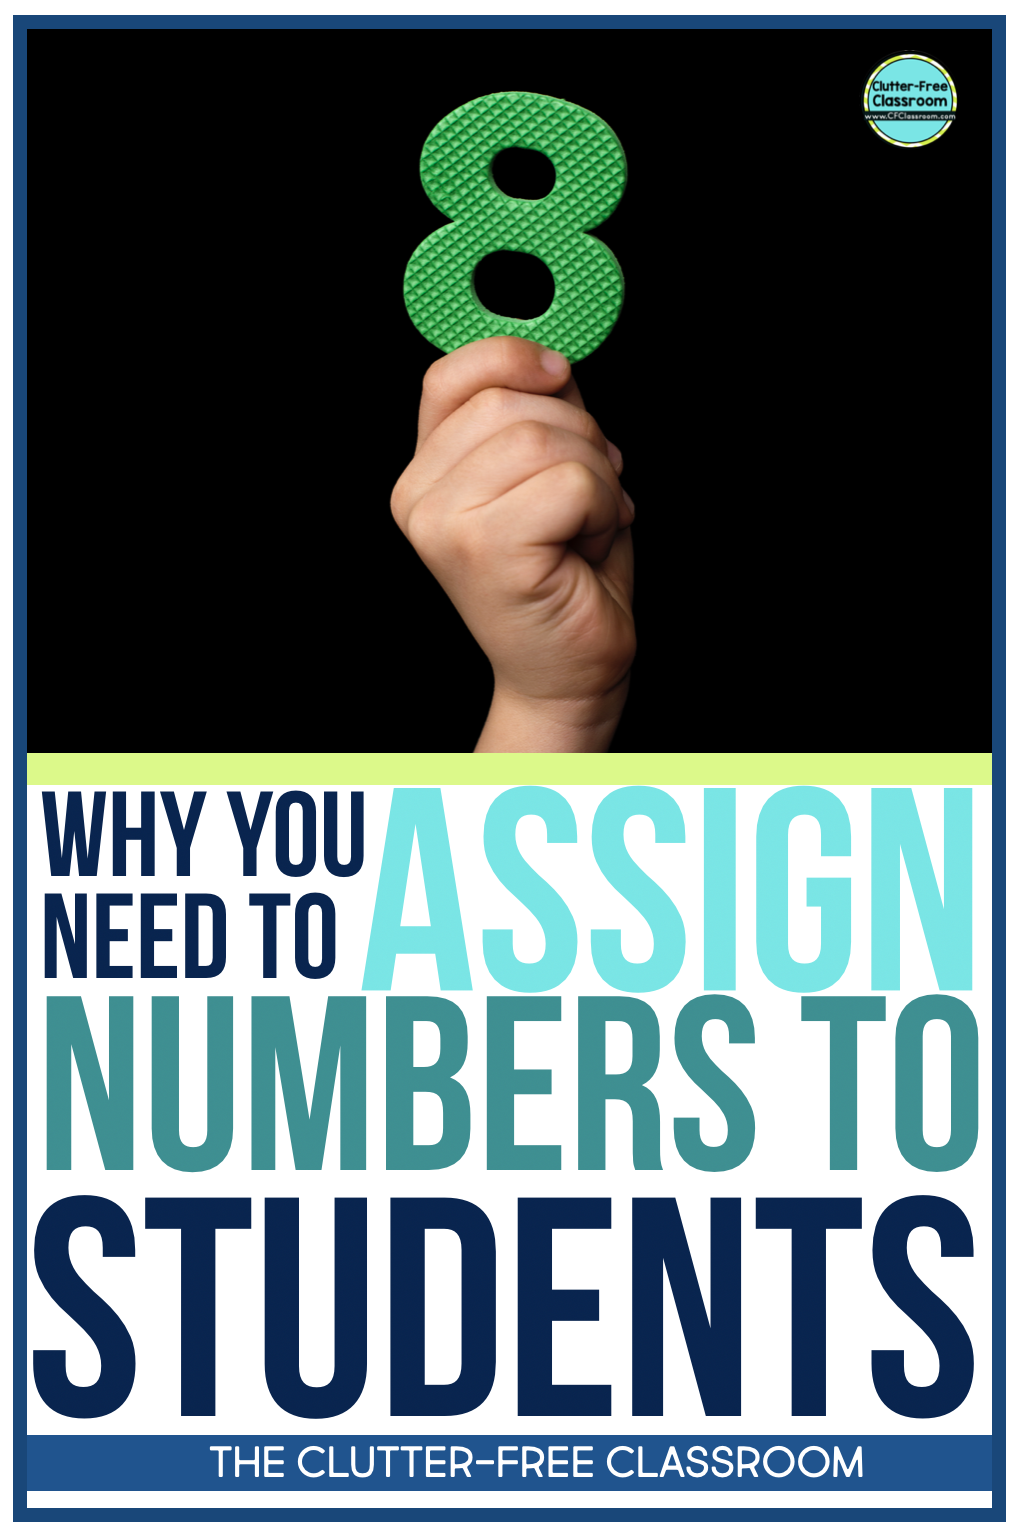 Assigning student numbers will promote classroom management, easy procedures, and elementary routines. Check out these ideas, strategies, and techniques from the Clutter Free Classroom.